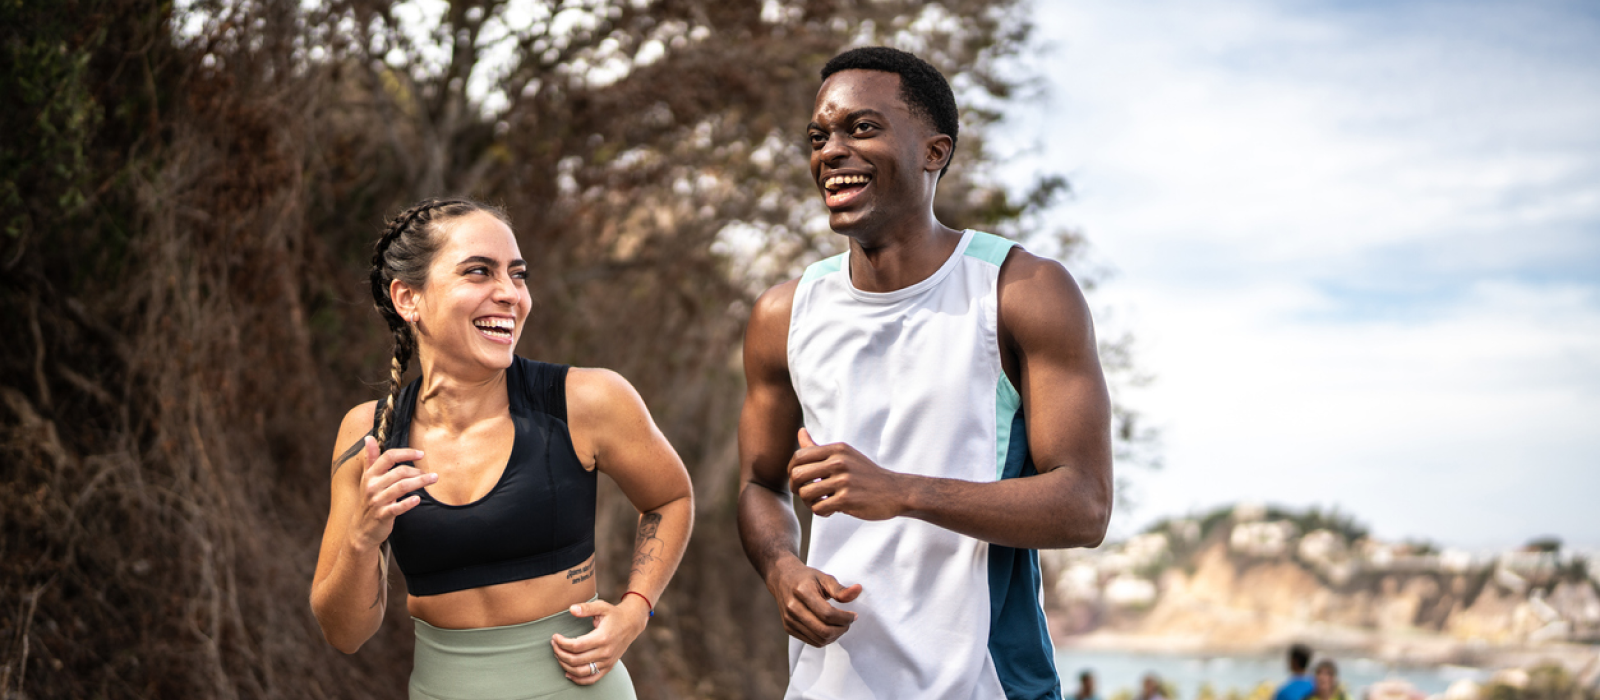 Two friends on a jog are using physical exercise to stimulate the vagus nerve.